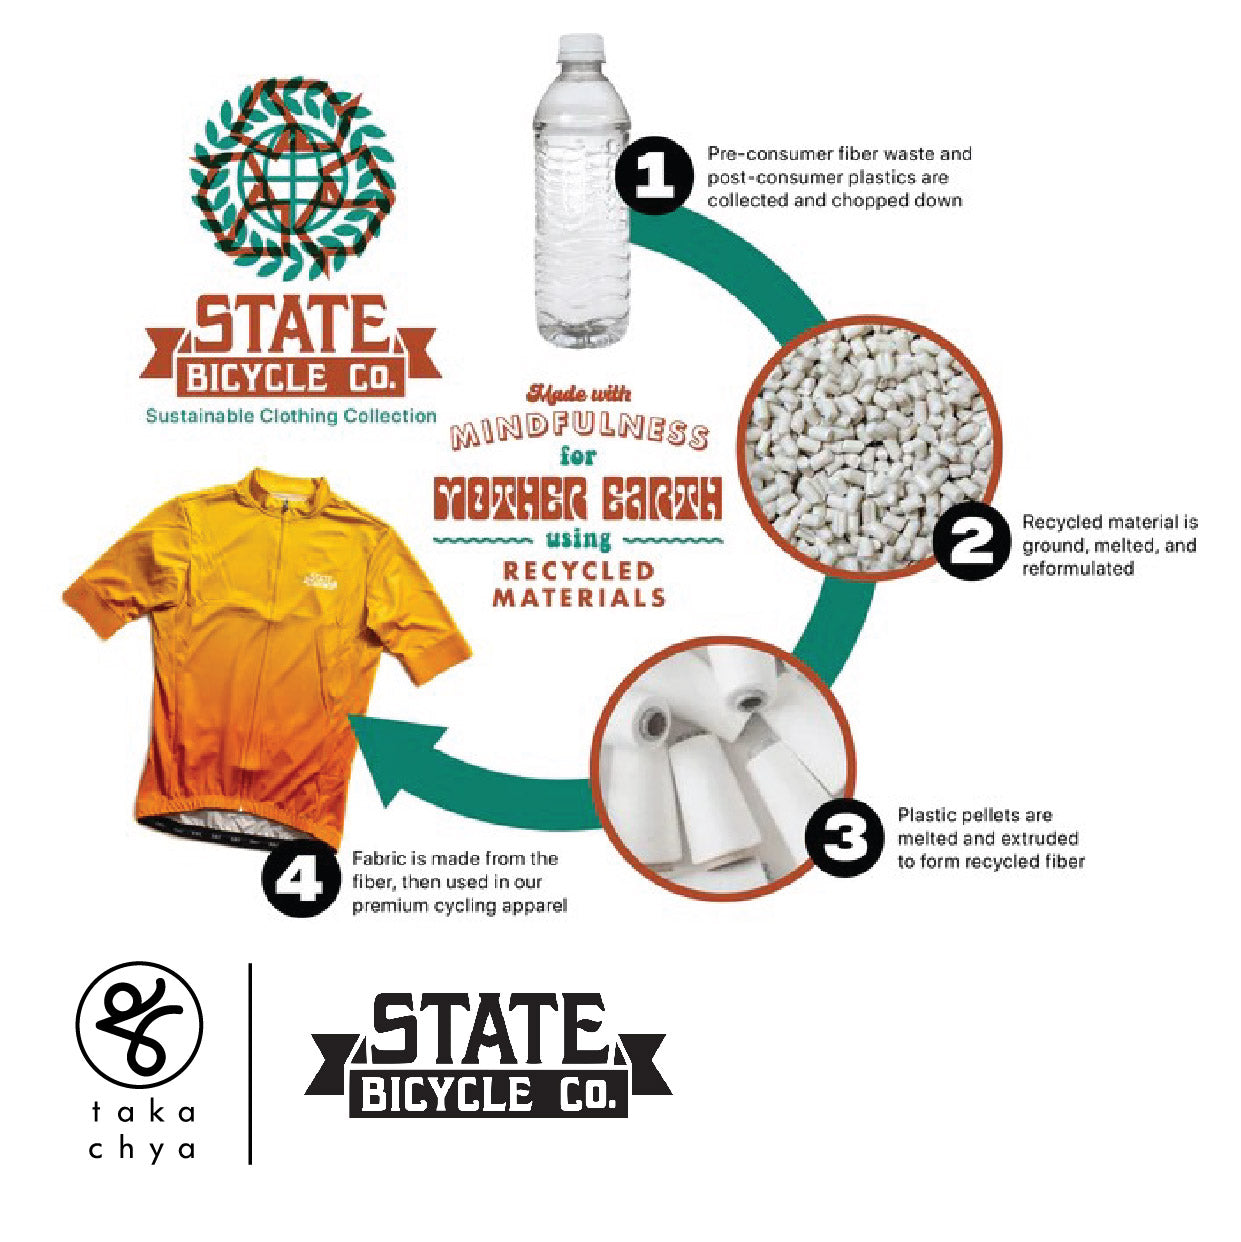 STATE BICYCLE CO. - "RELAX.." JERSEY - SUSTAINABLE CLOTHING COLLECTION (WHITE)